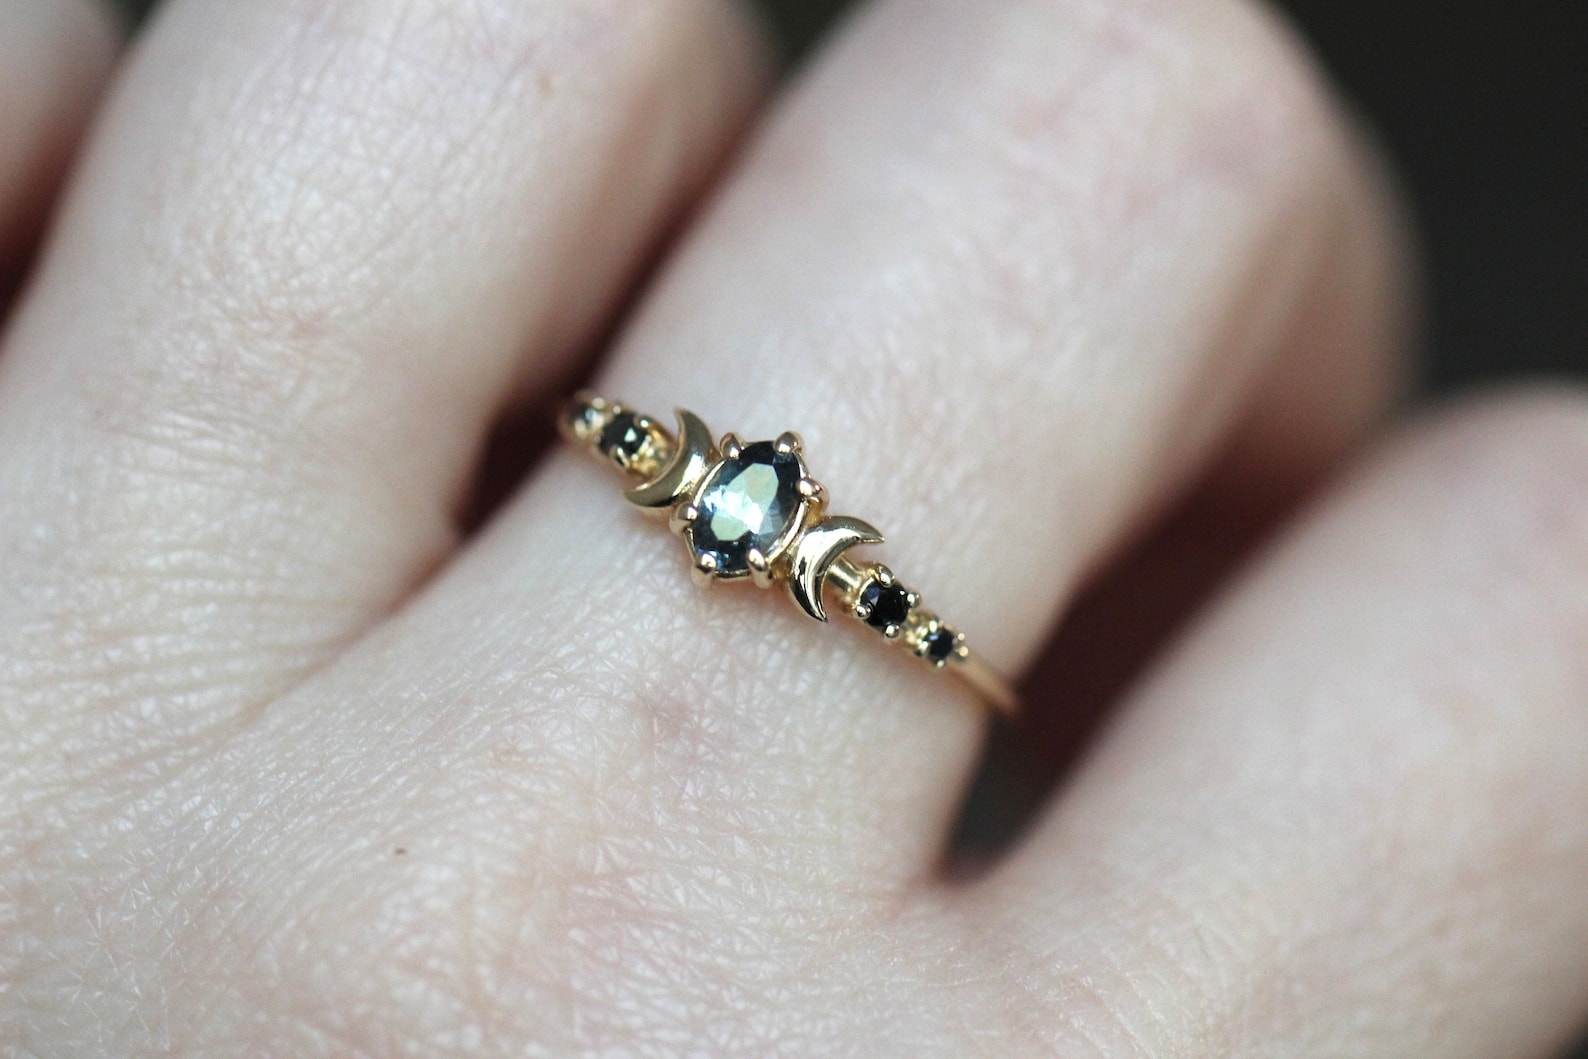 moon phase spinel ring on the finger